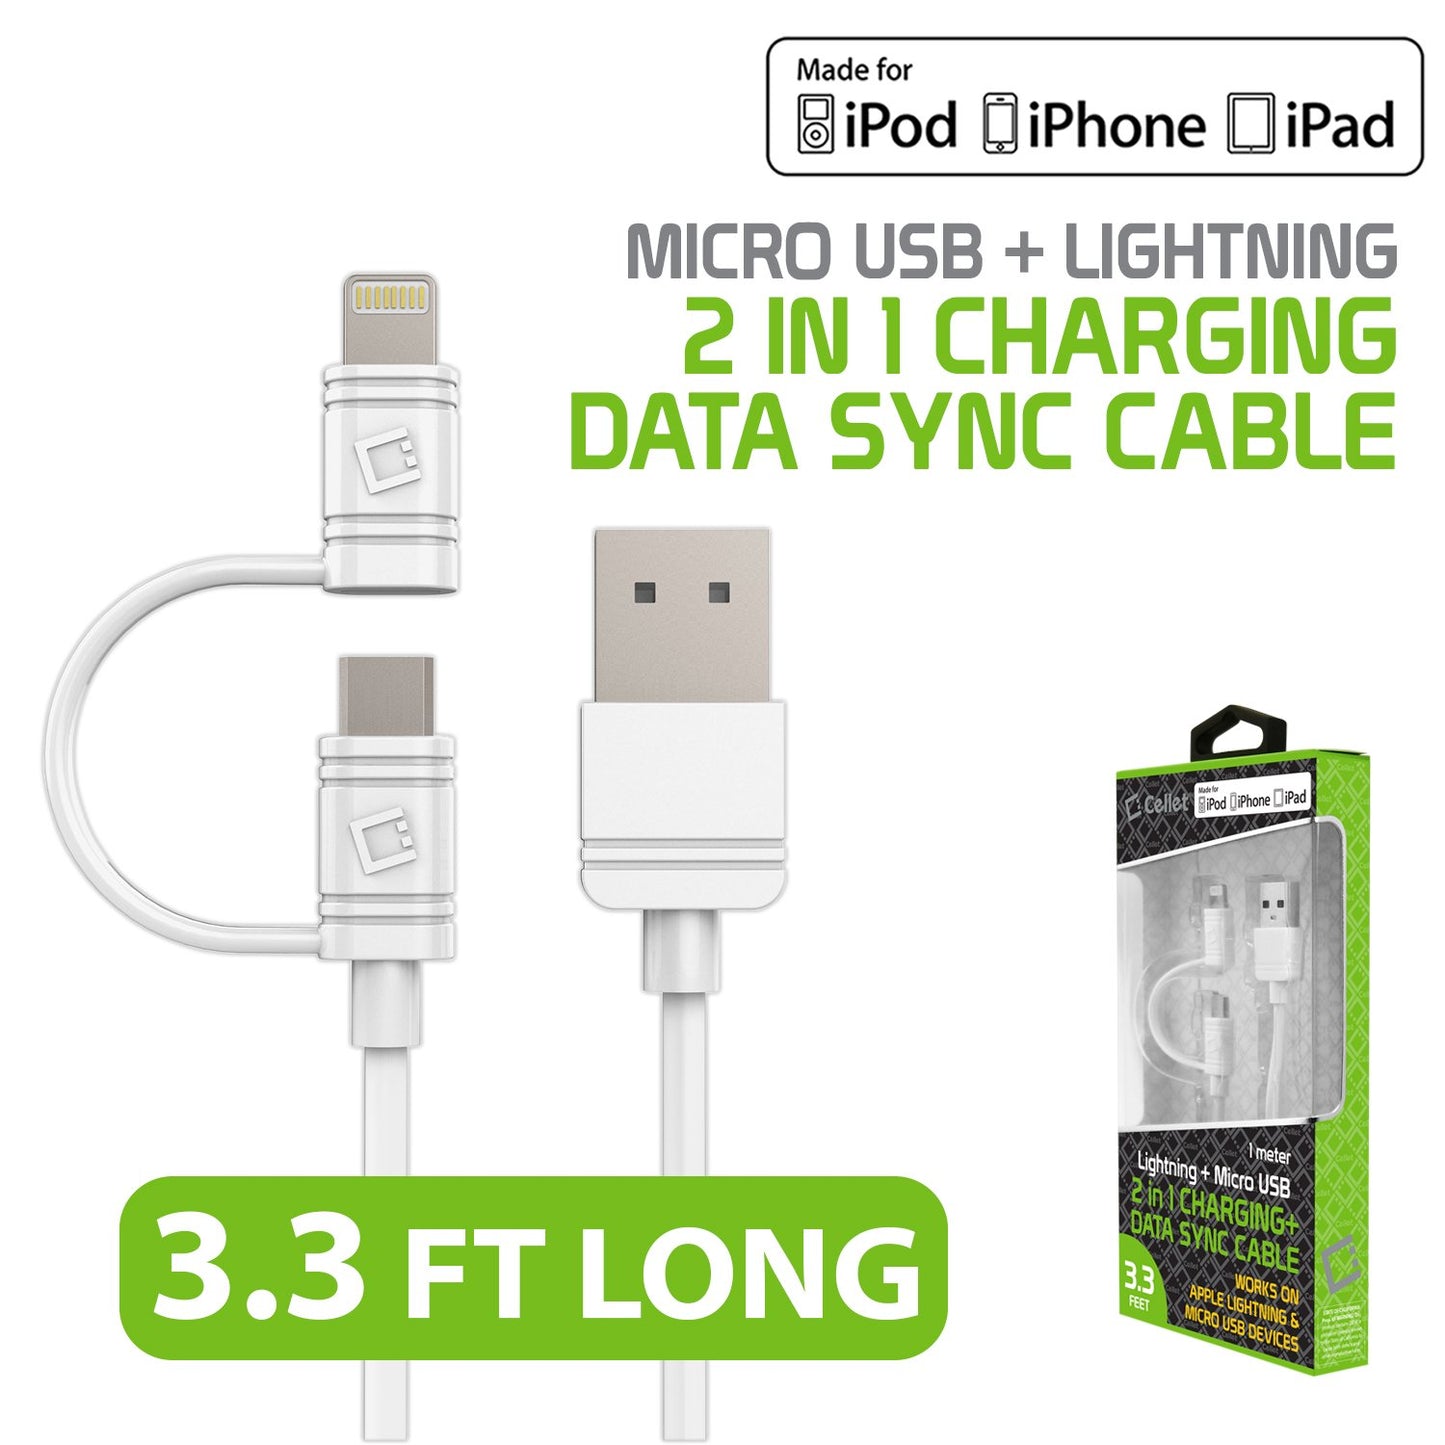 DAAPP5TKWT - Cellet 2 in 1 Micro USB + Lightning (Licensed by Apple, MFI Certified) Charging/Data Sync Cable - White